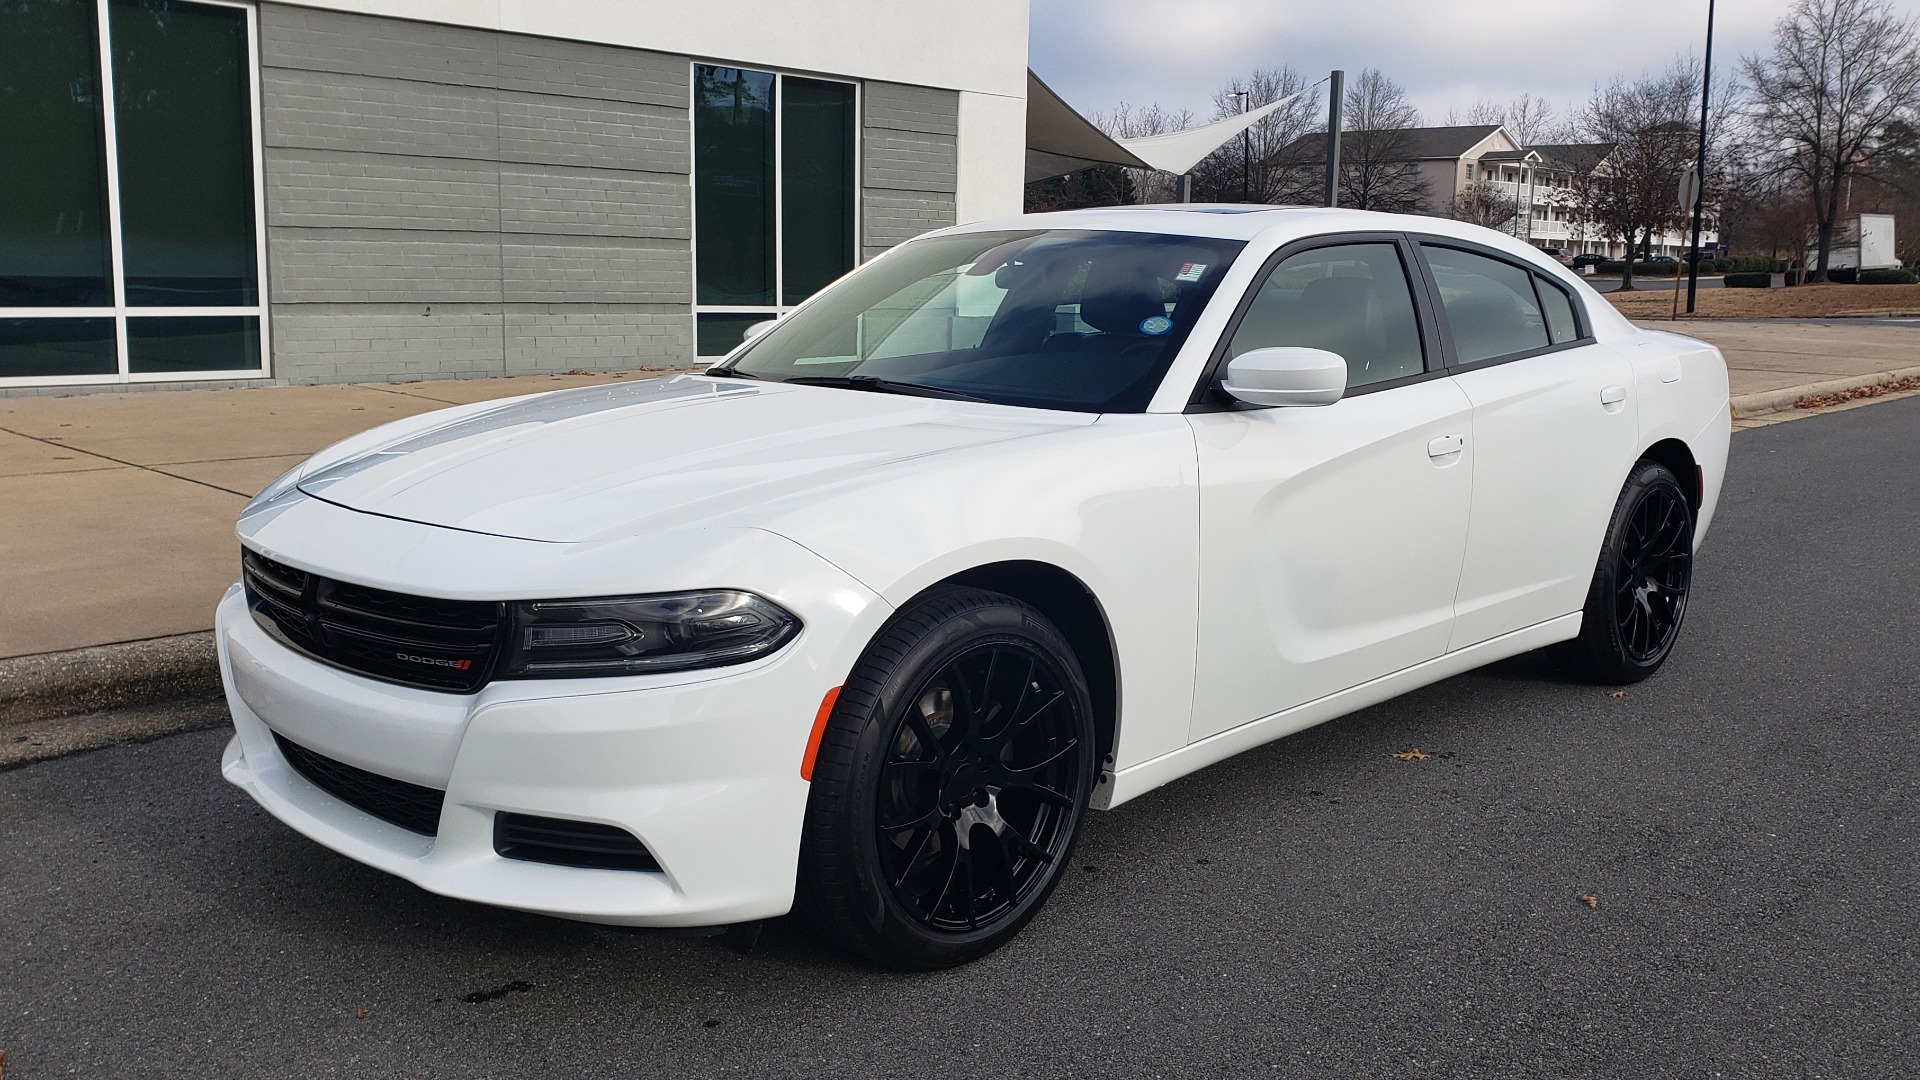 Used 2020 Dodge CHARGER SXT / RWD / V6 / 8-SPD AUTO / LTHR / HTD STS / SUNROOF / REARVIEW for sale Sold at Formula Imports in Charlotte NC 28227 5